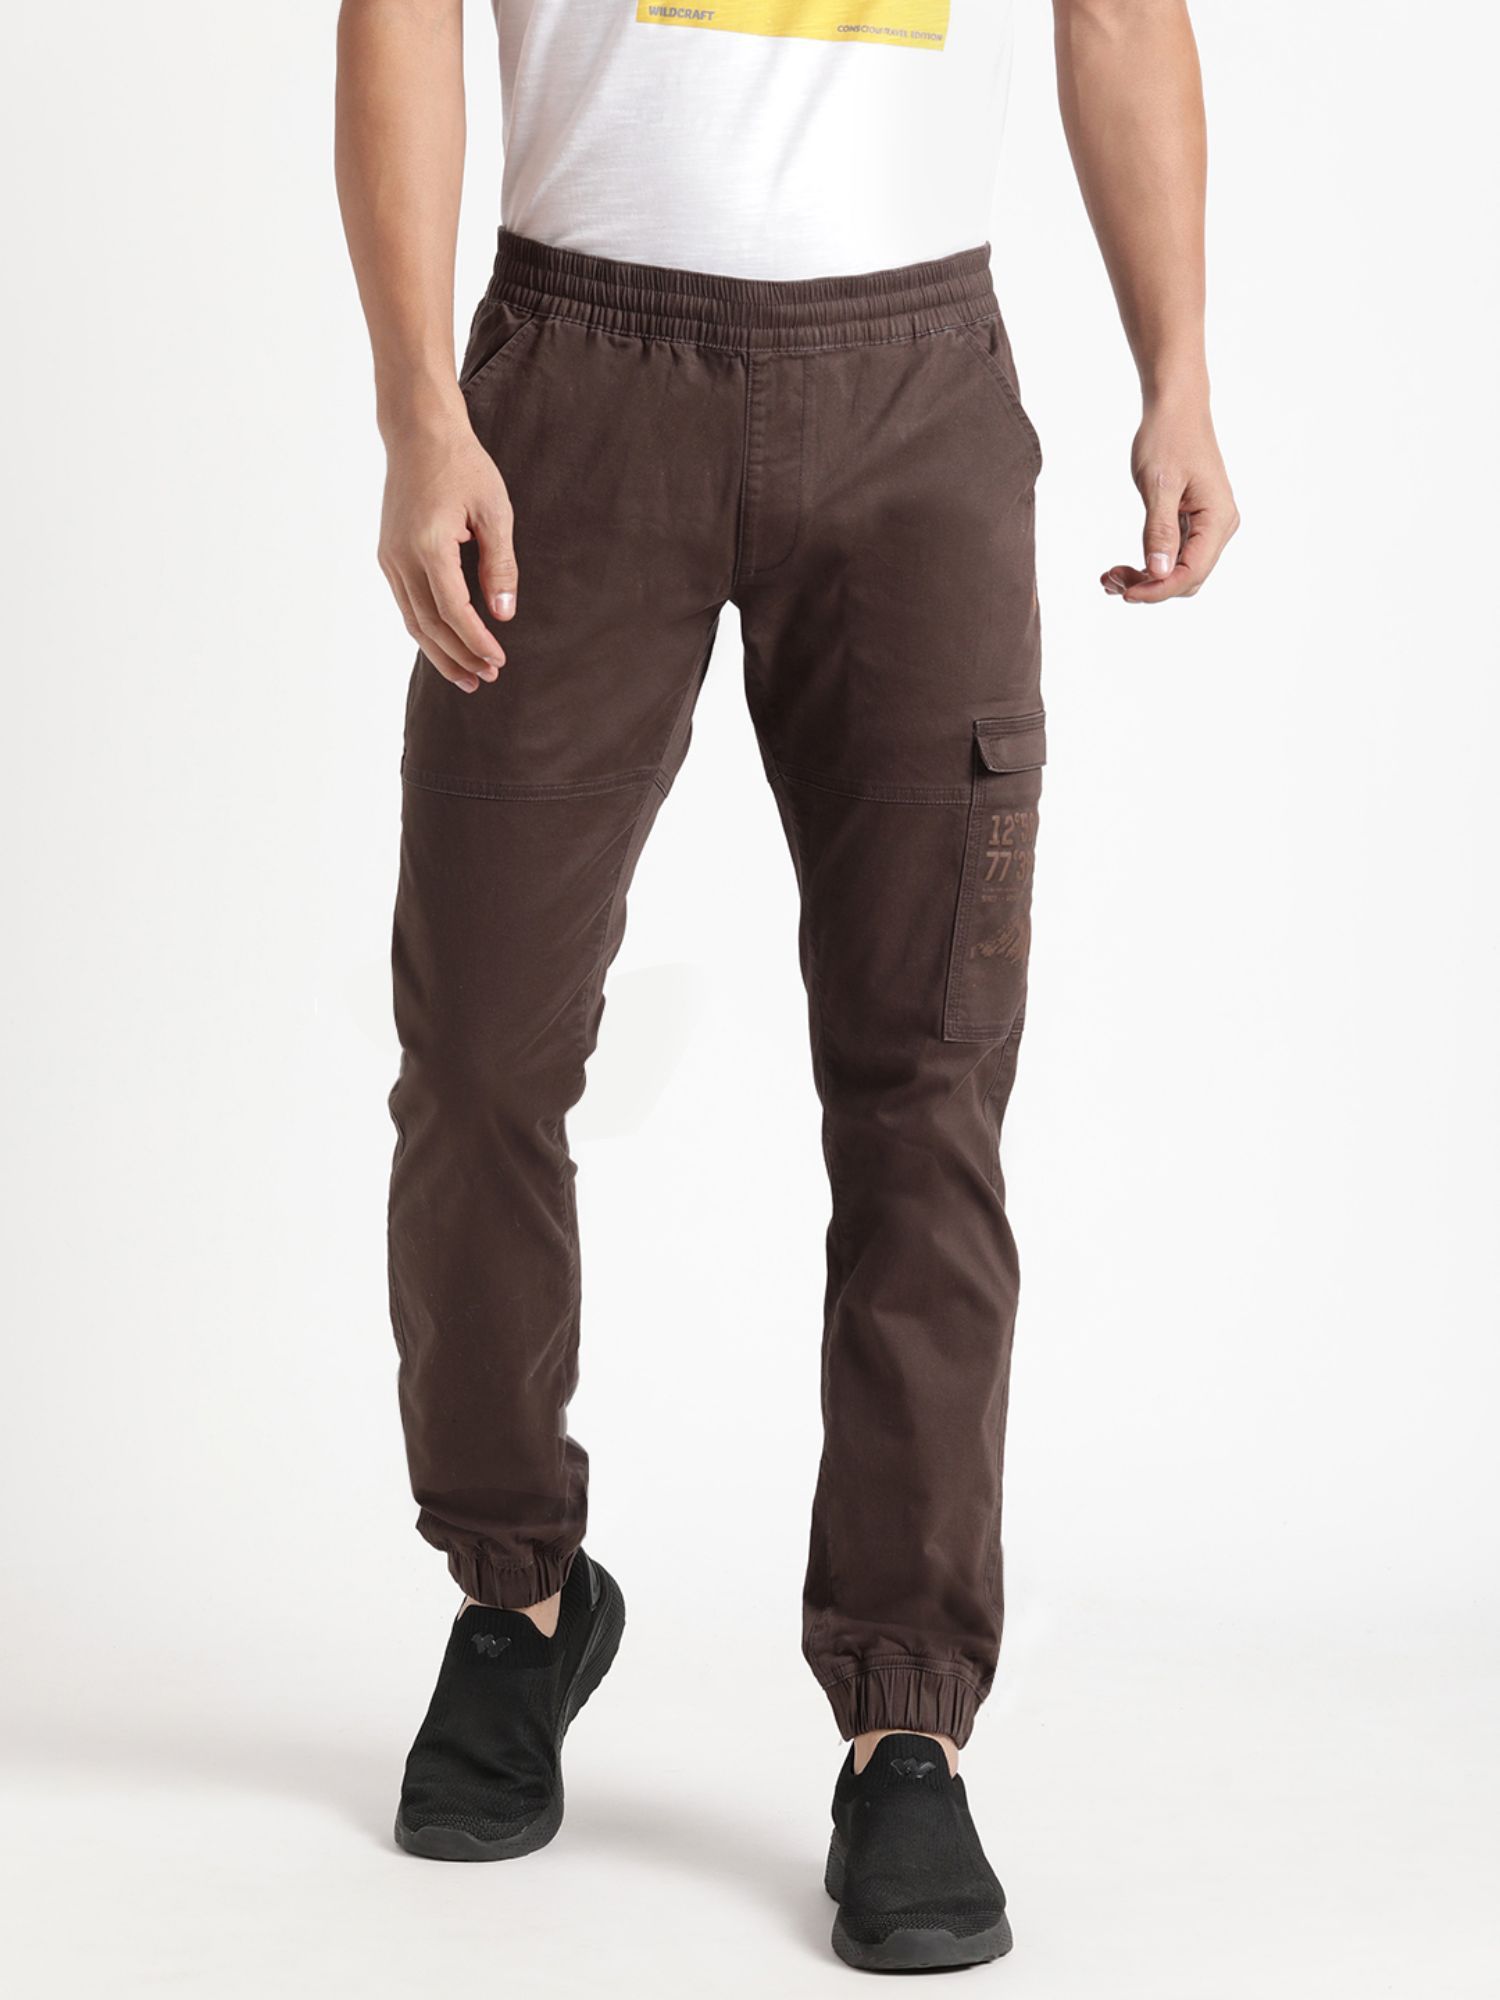 Buy Wildcraft Cotton Solid Olive Skinny Fit Casual Trousers Online